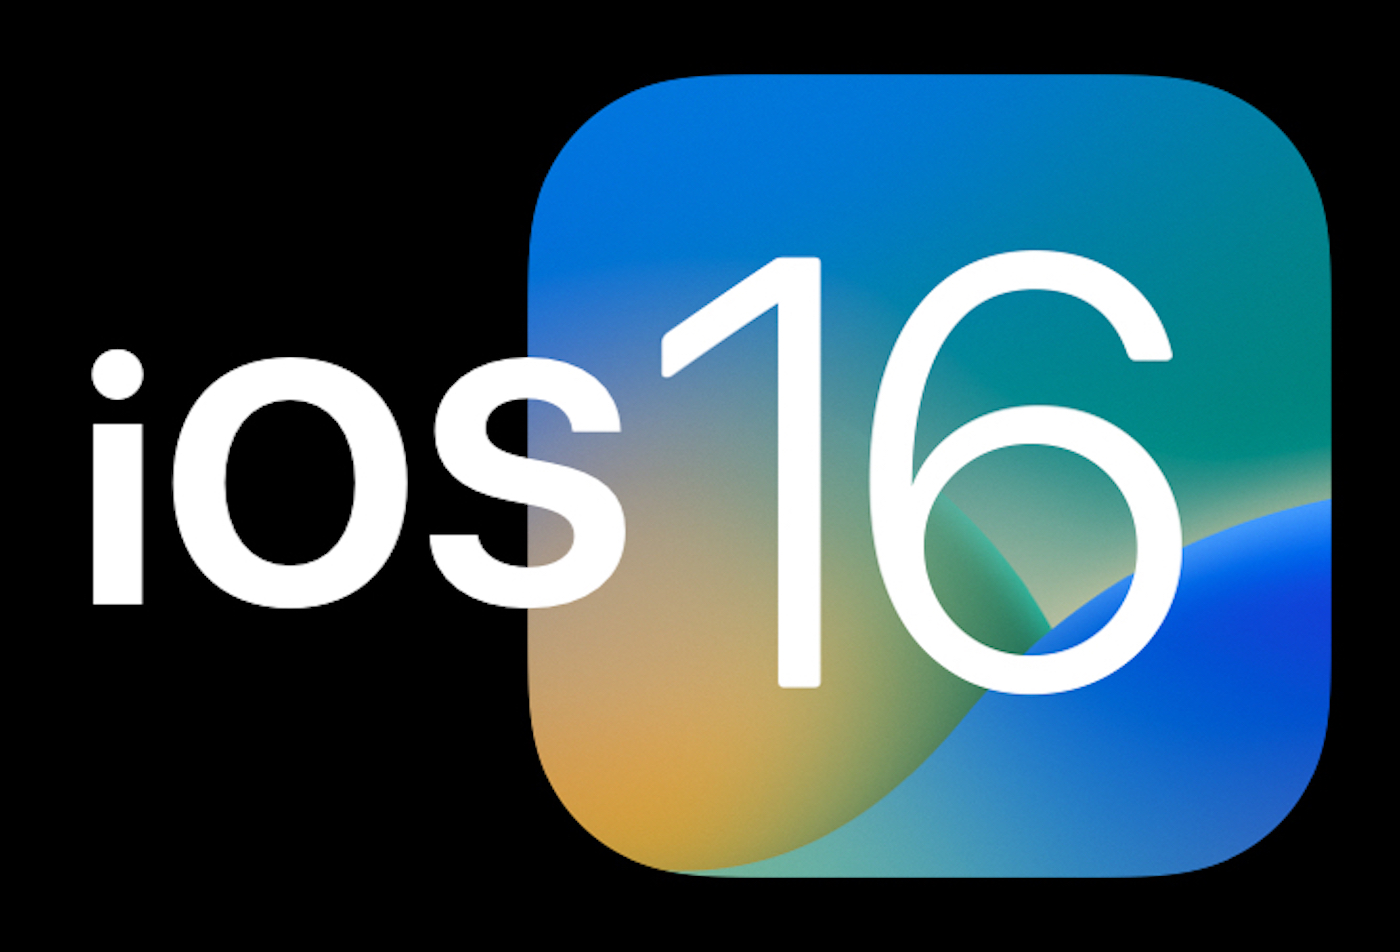 How to Install iOS 16 on iPhone